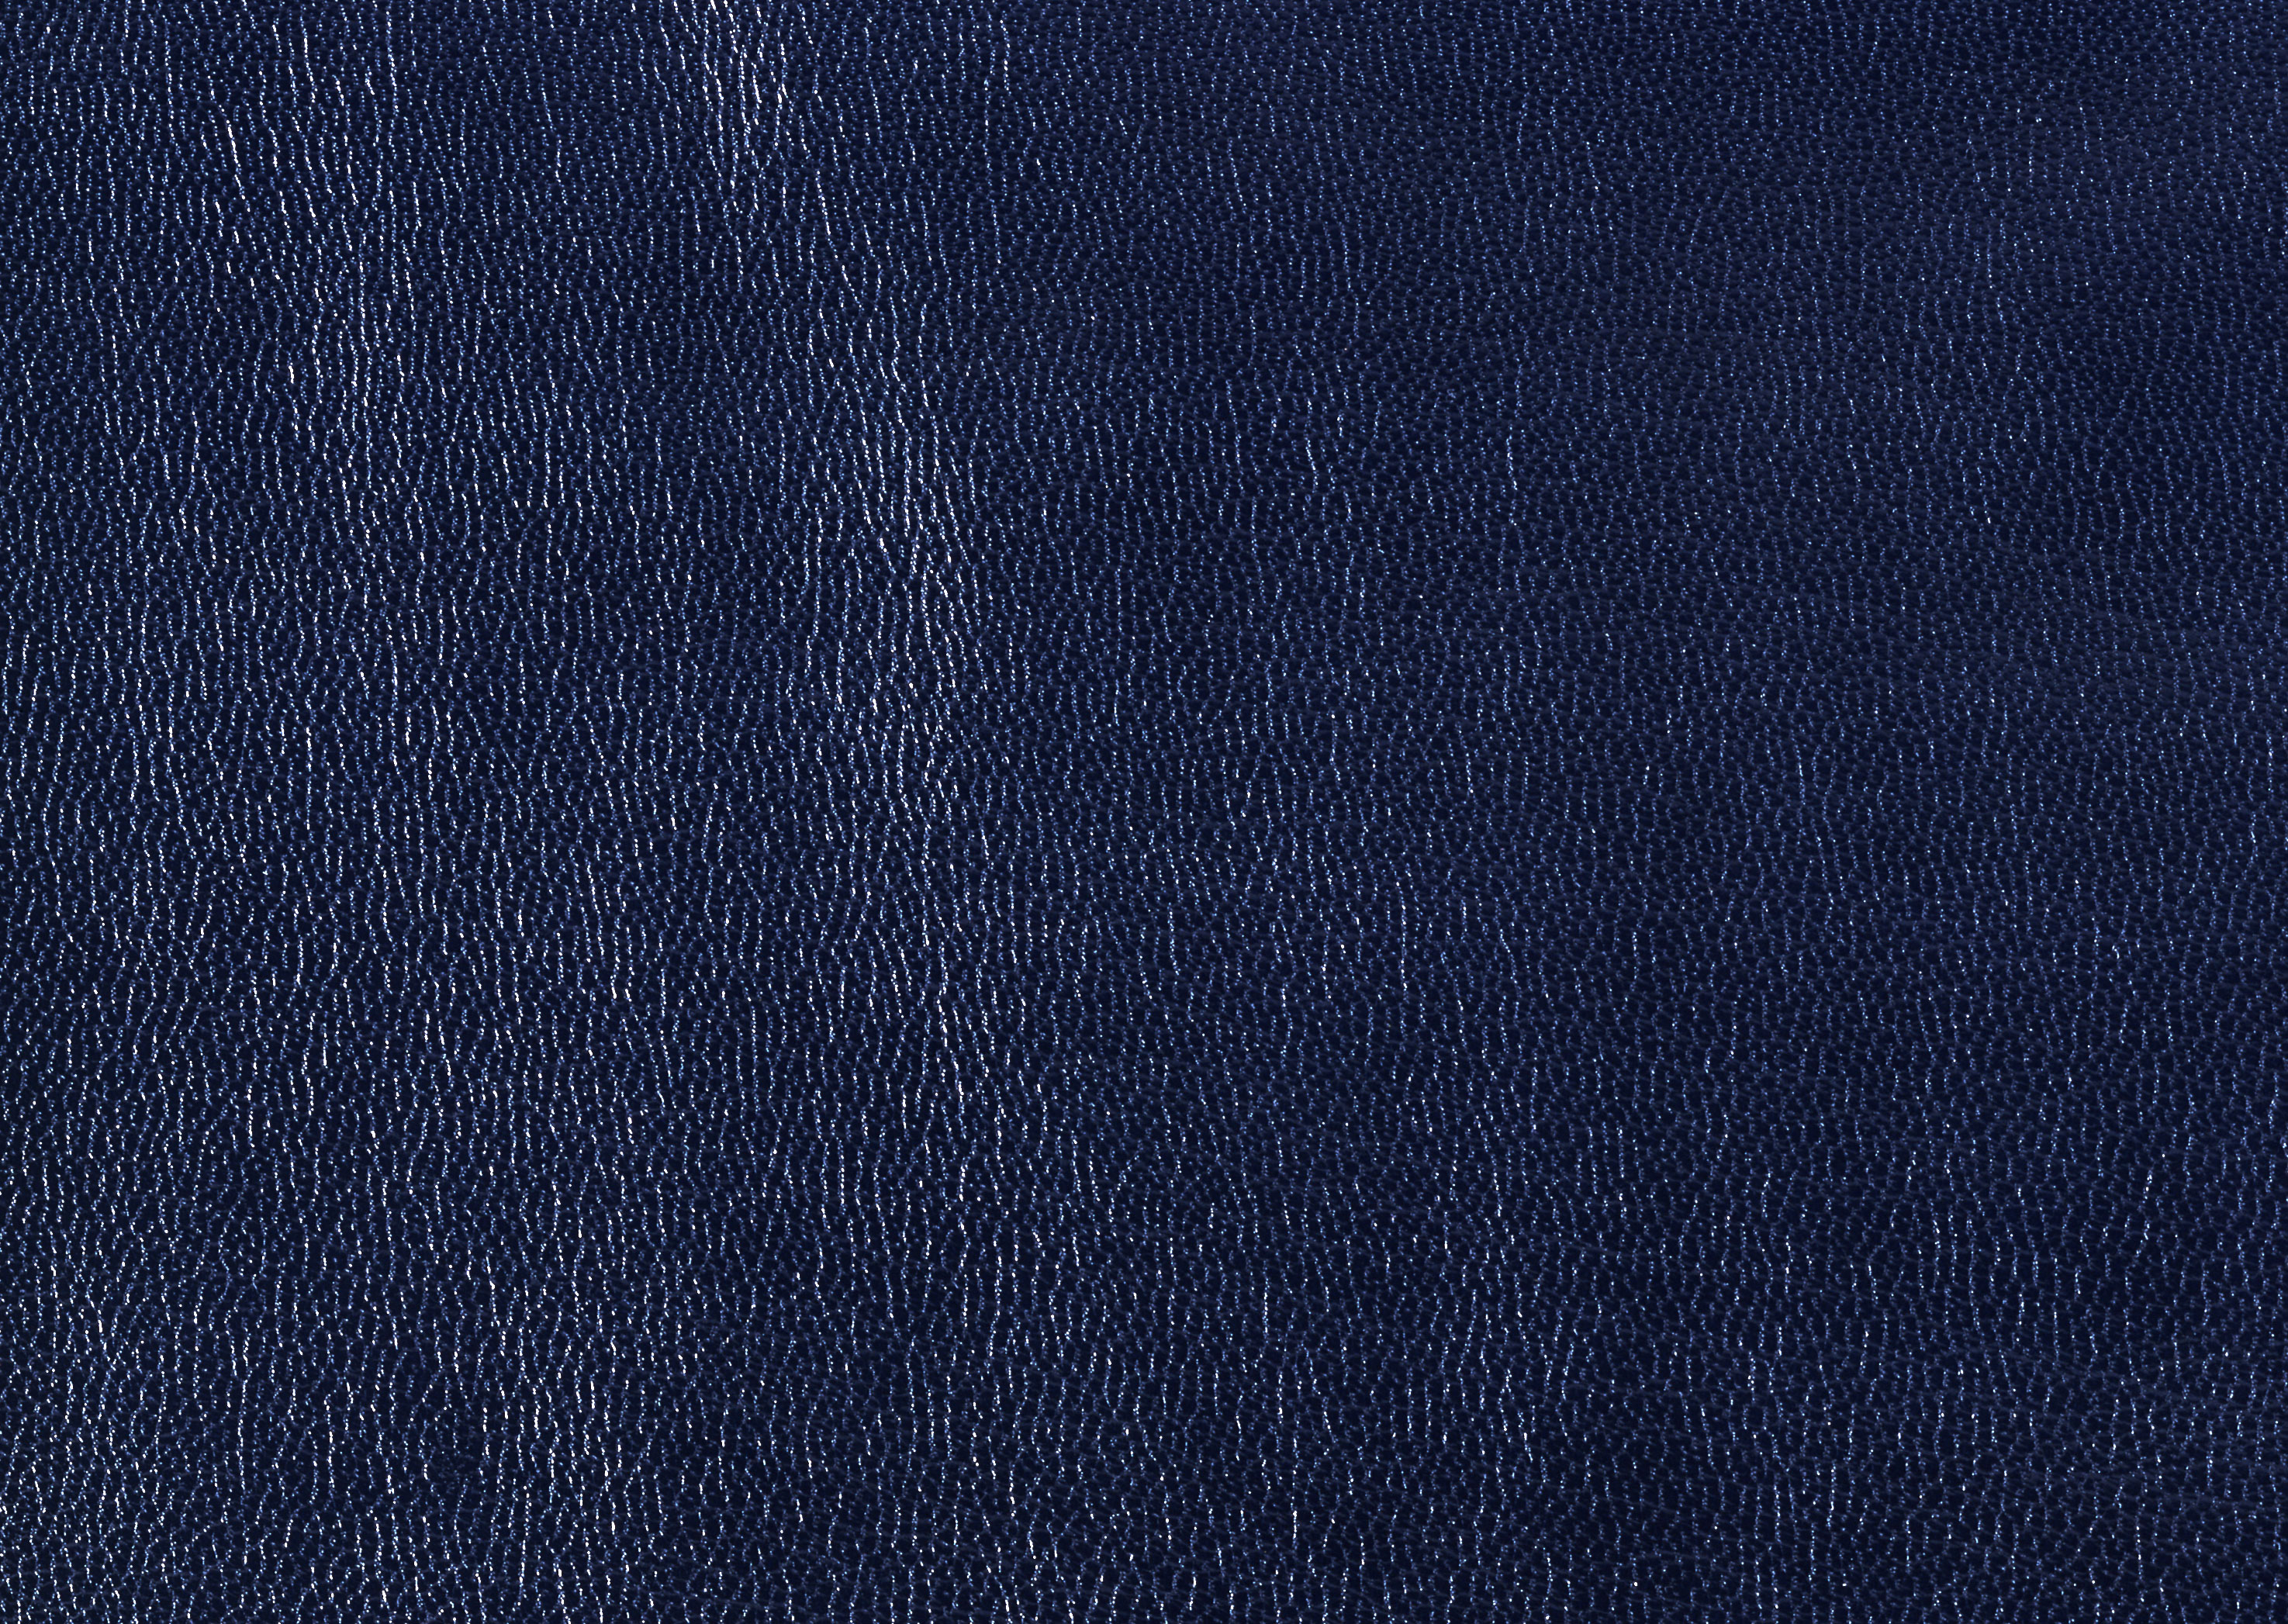 Blue leather texture background image free download